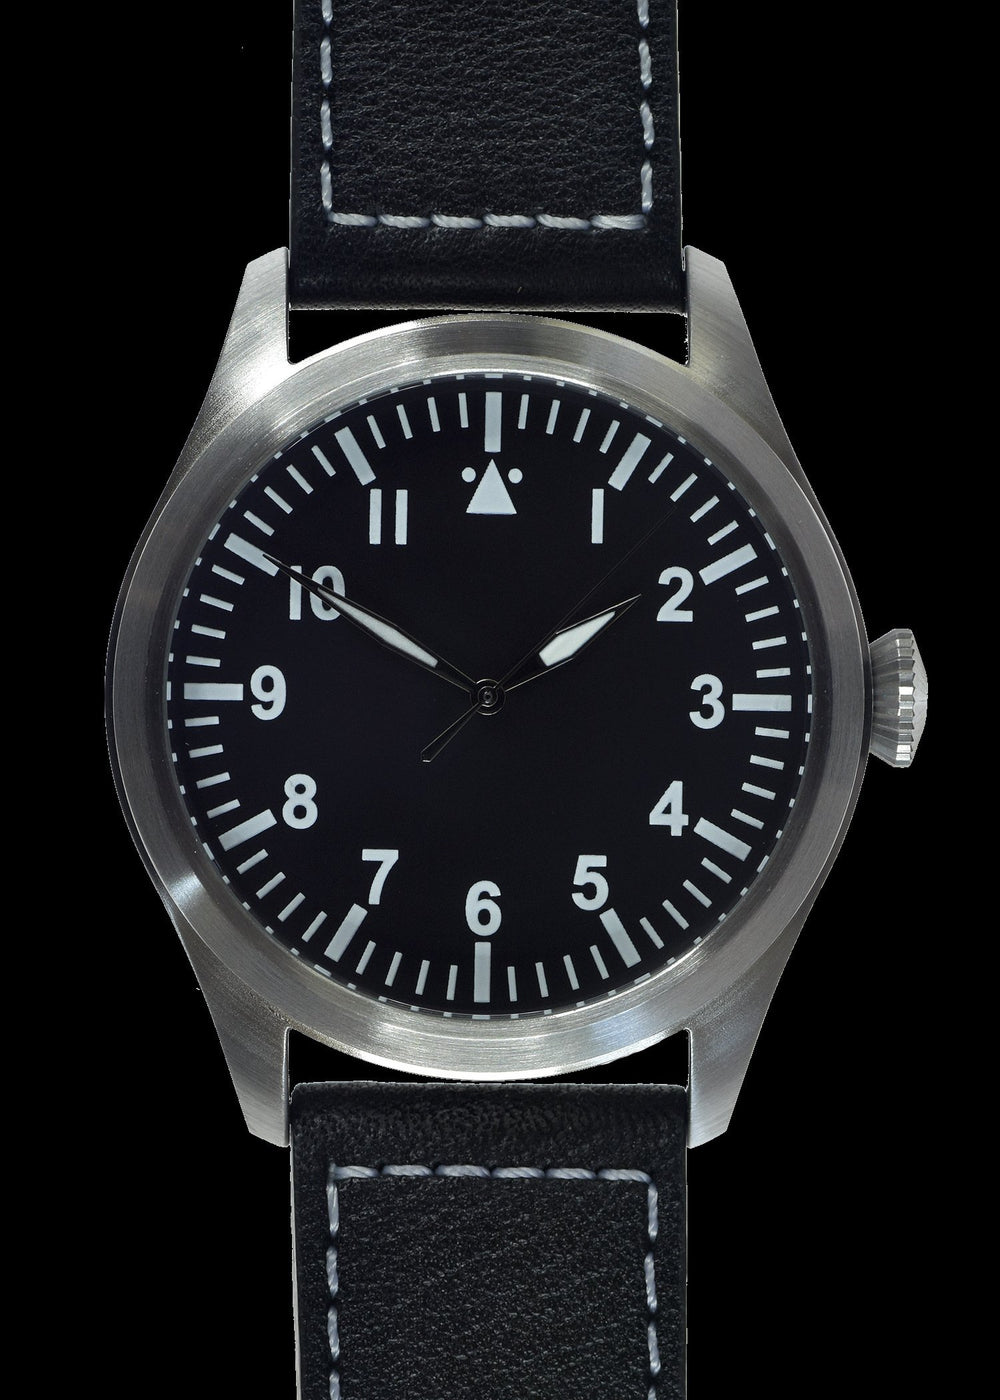 MWC Classic Pilots Watch - 46mm Limited Edition XL Military Pilots Watch with Sweep Second Hand (Unbranded)